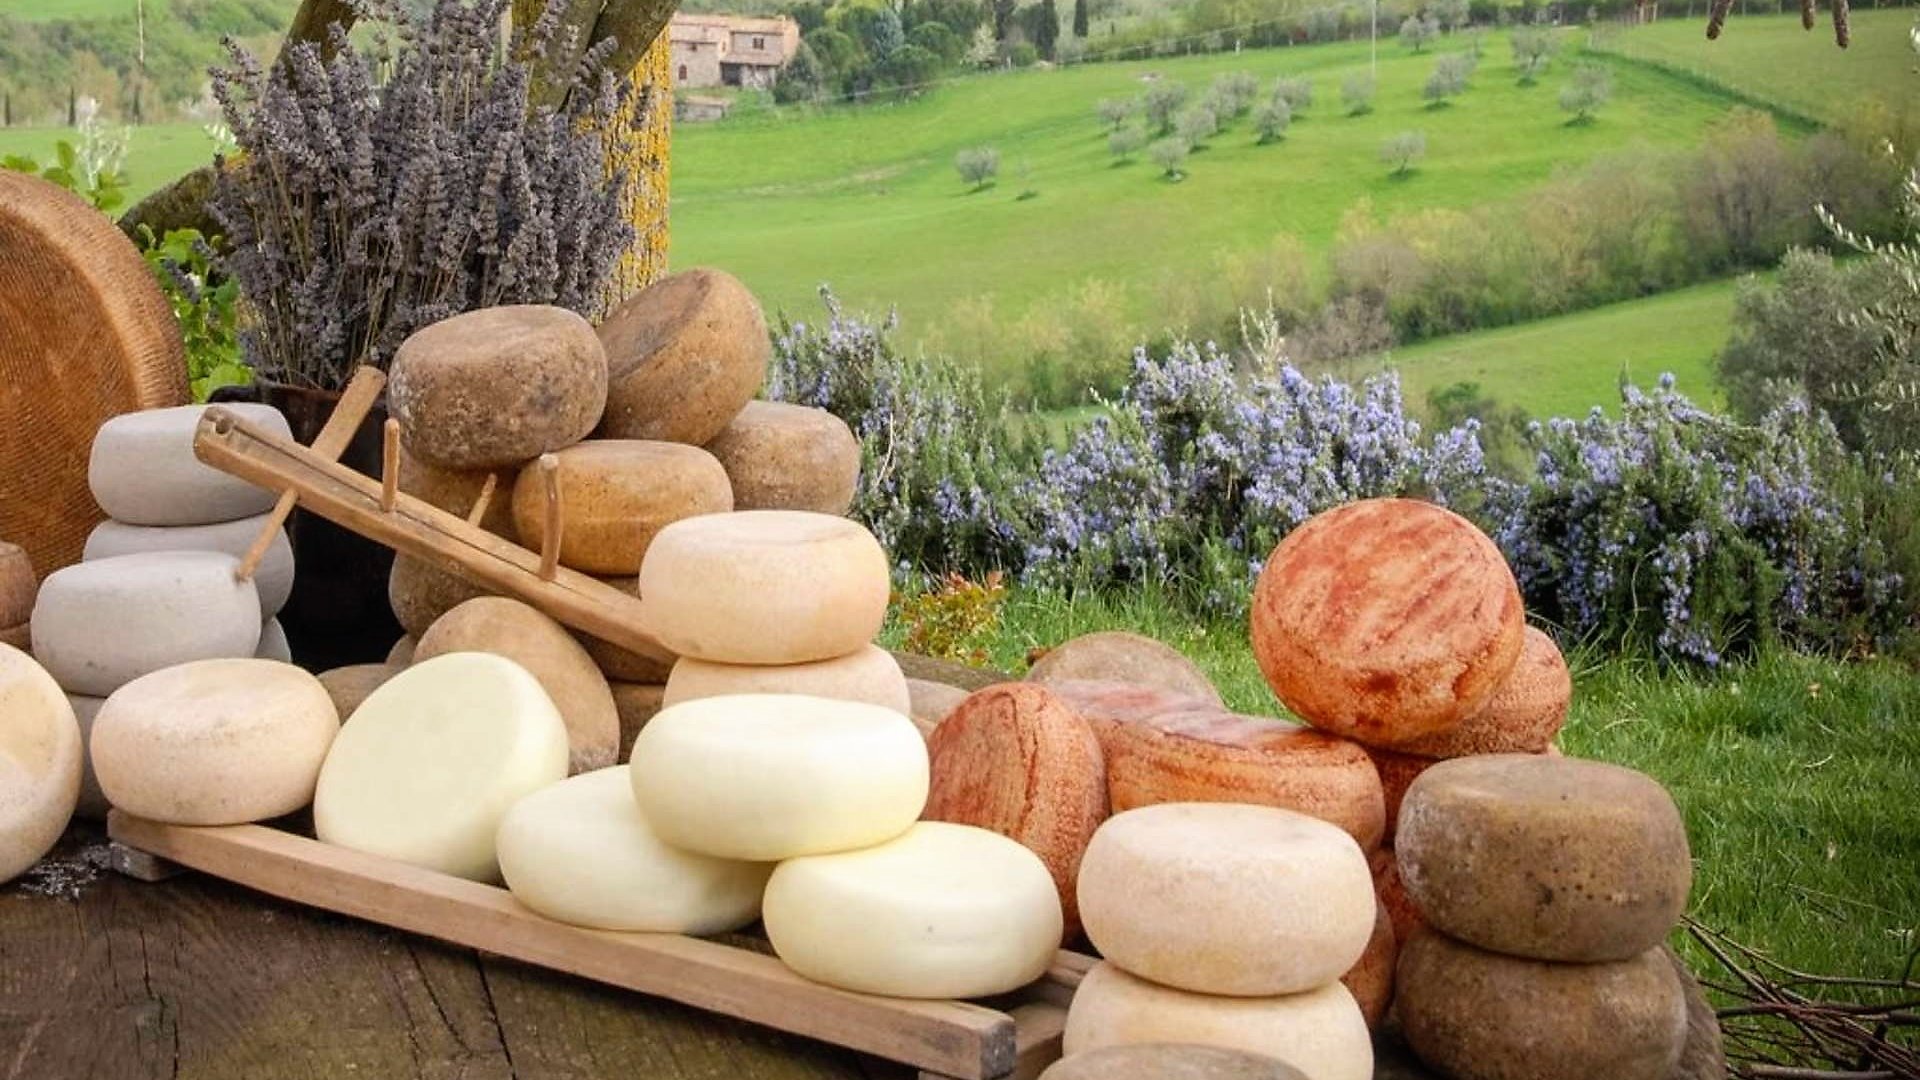 A tour with tasting to discover the secrets of the processing of Pecorino di Pienza, Tuscan cheese excellence.